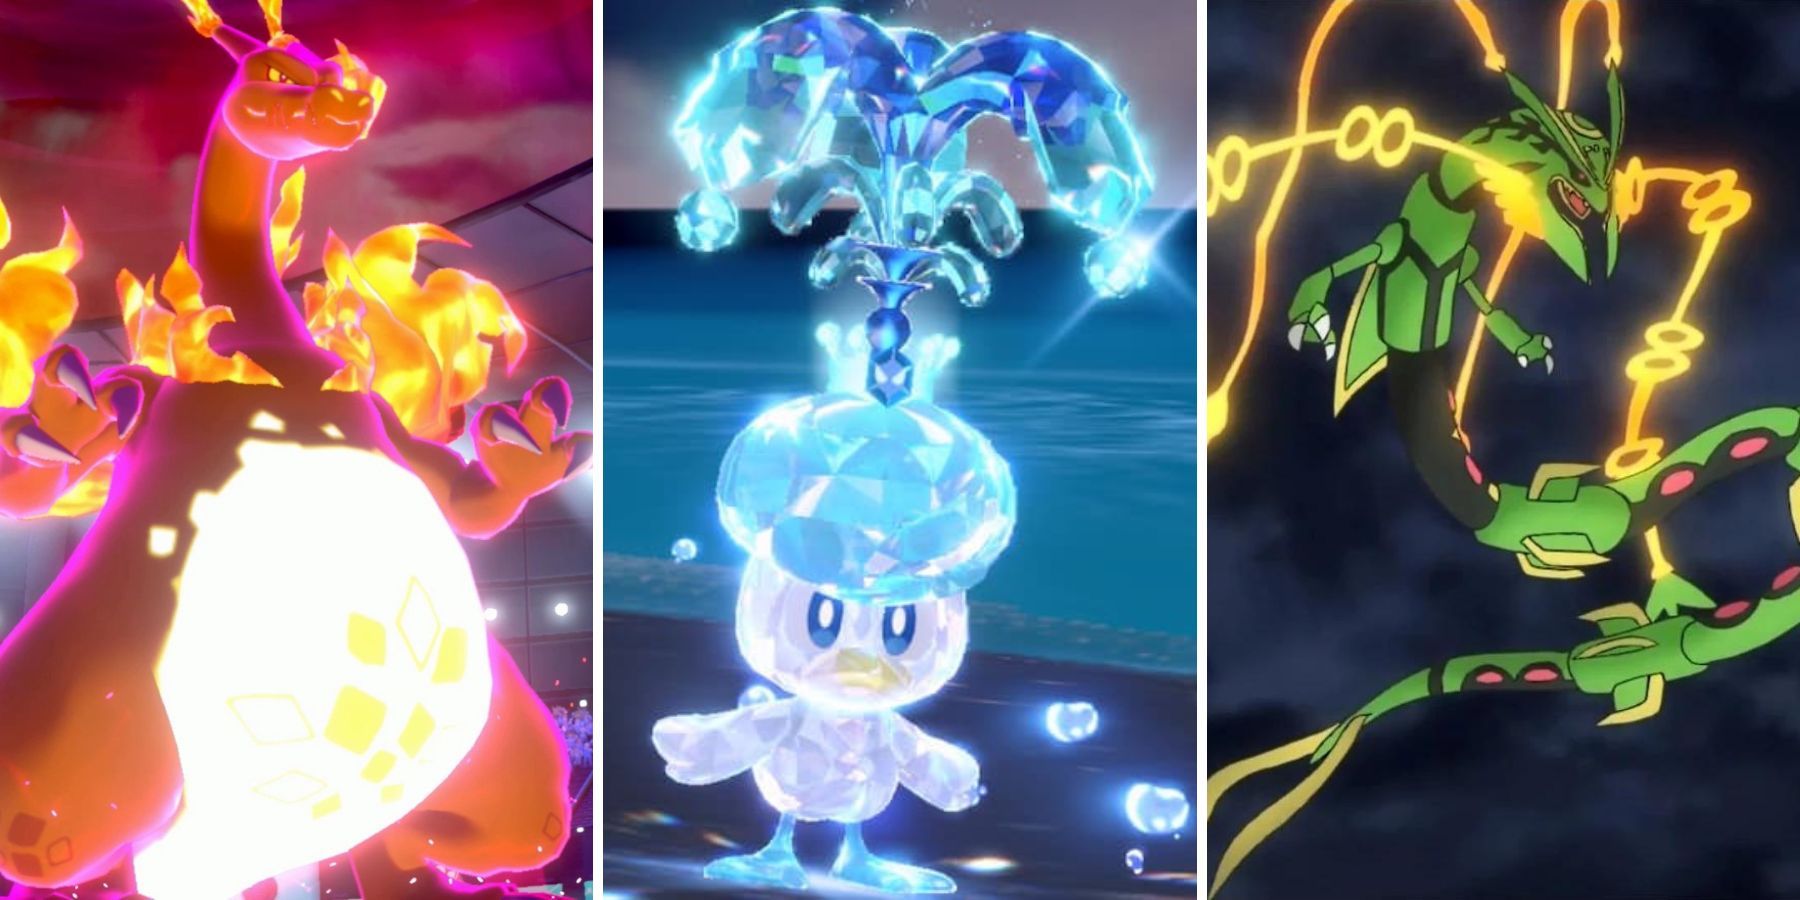 Which is a stronger form of Pokemon battle boosters, Mega Evolution,  Gigantamax, Dynamax or Z-moves? - Quora